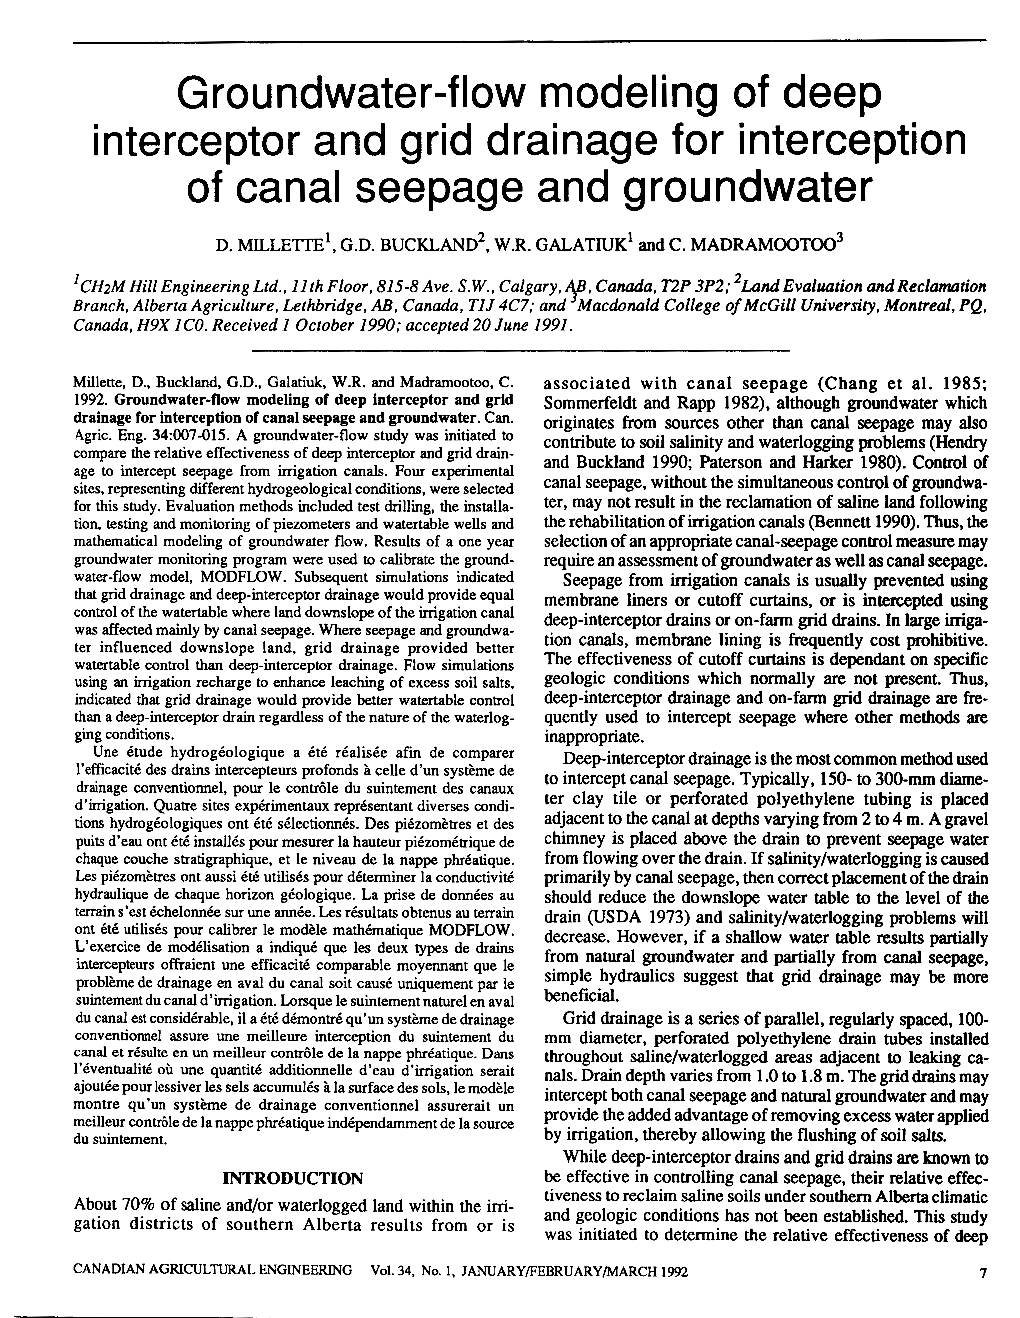 Groundwater-Flow Modeling of Deep Interceptor and Grid Drainage for Interception of Canal Seepage and Groundwater